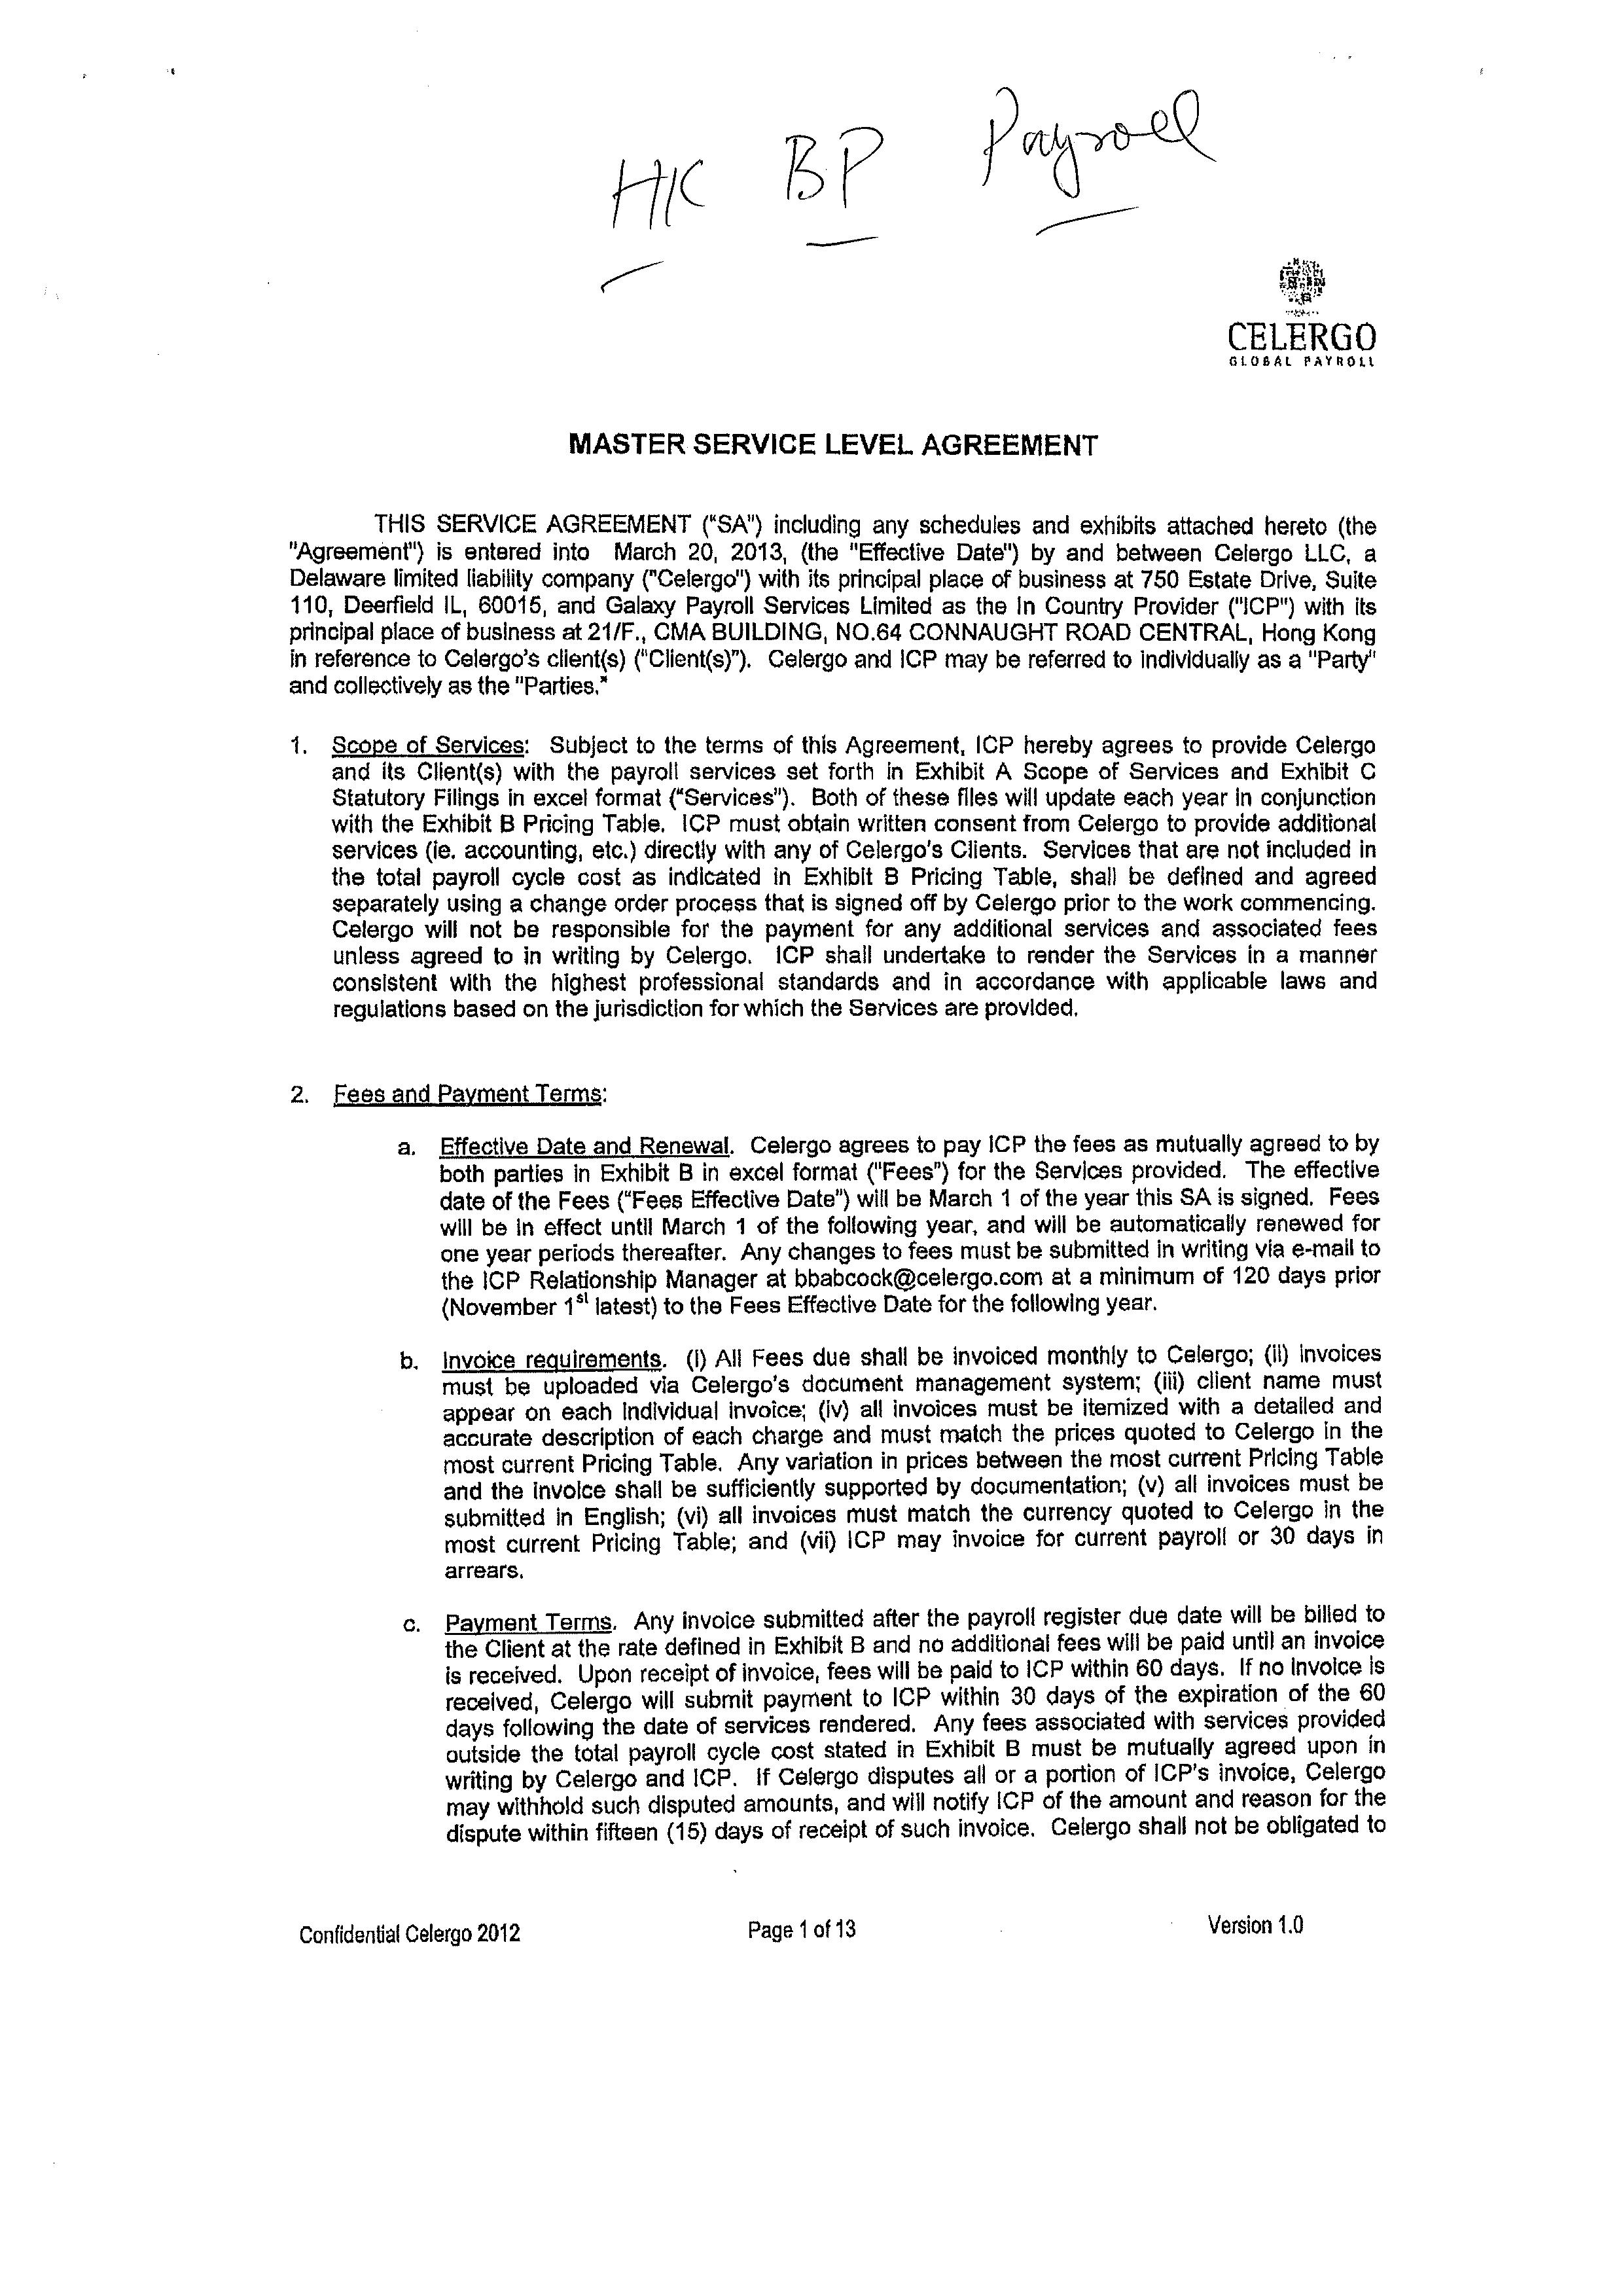 payroll services agreement template